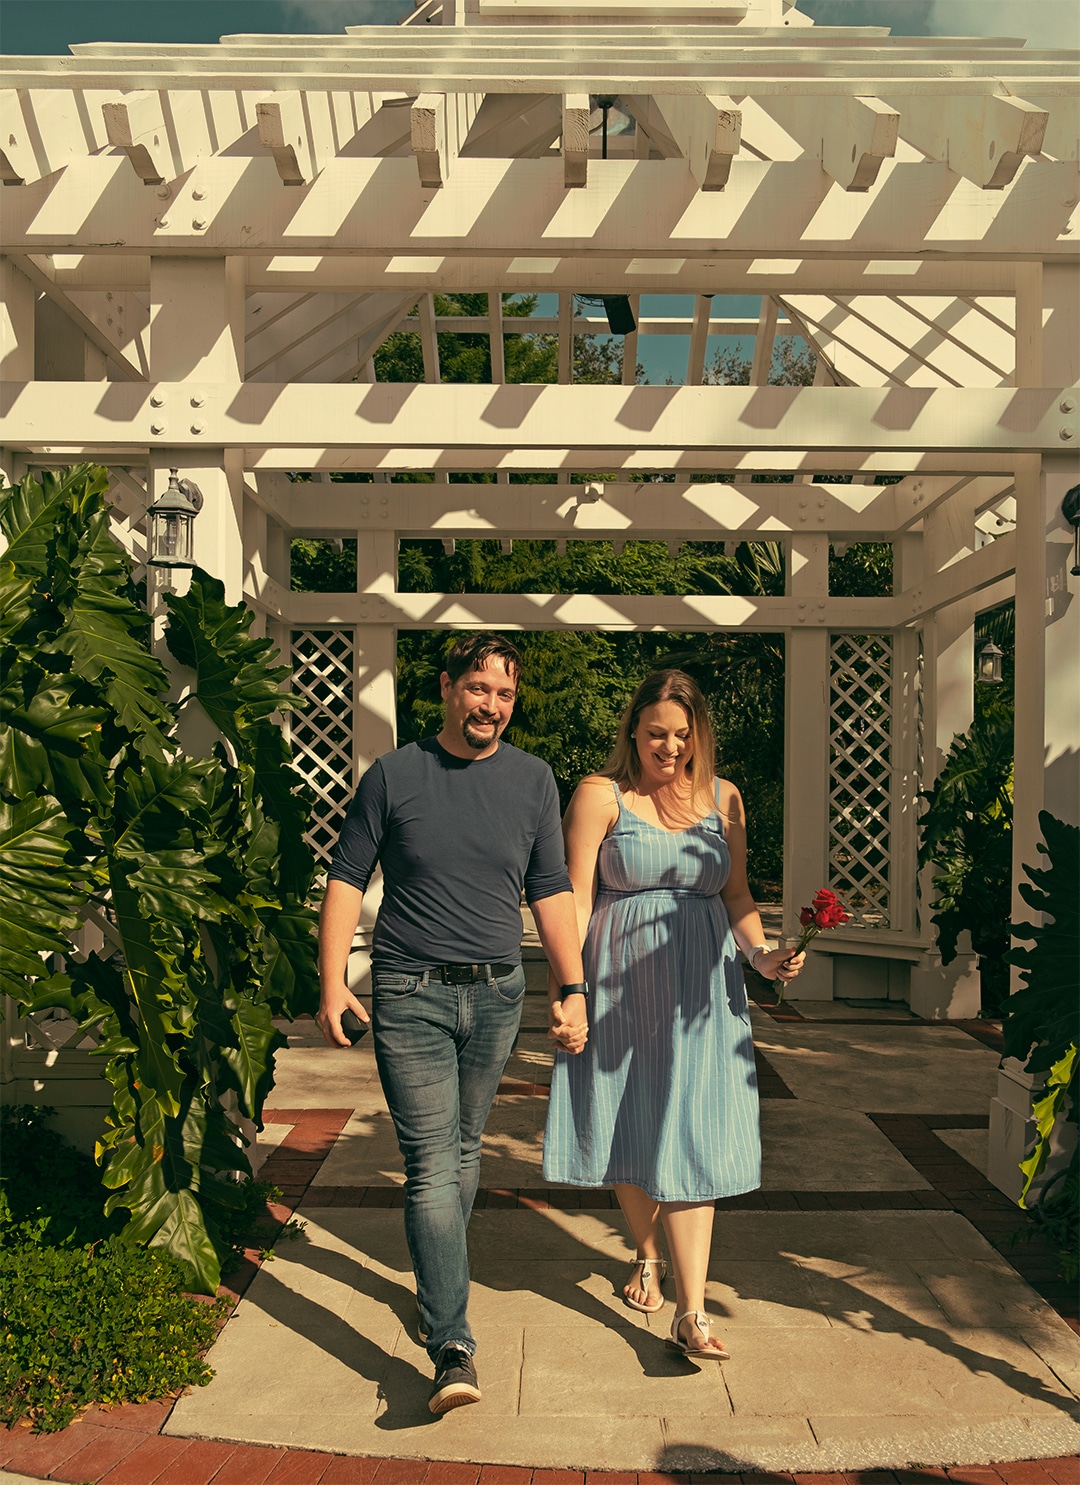 man and woman hold hands while woman holds red flowers in hand as they walk away from under white gazebo structure